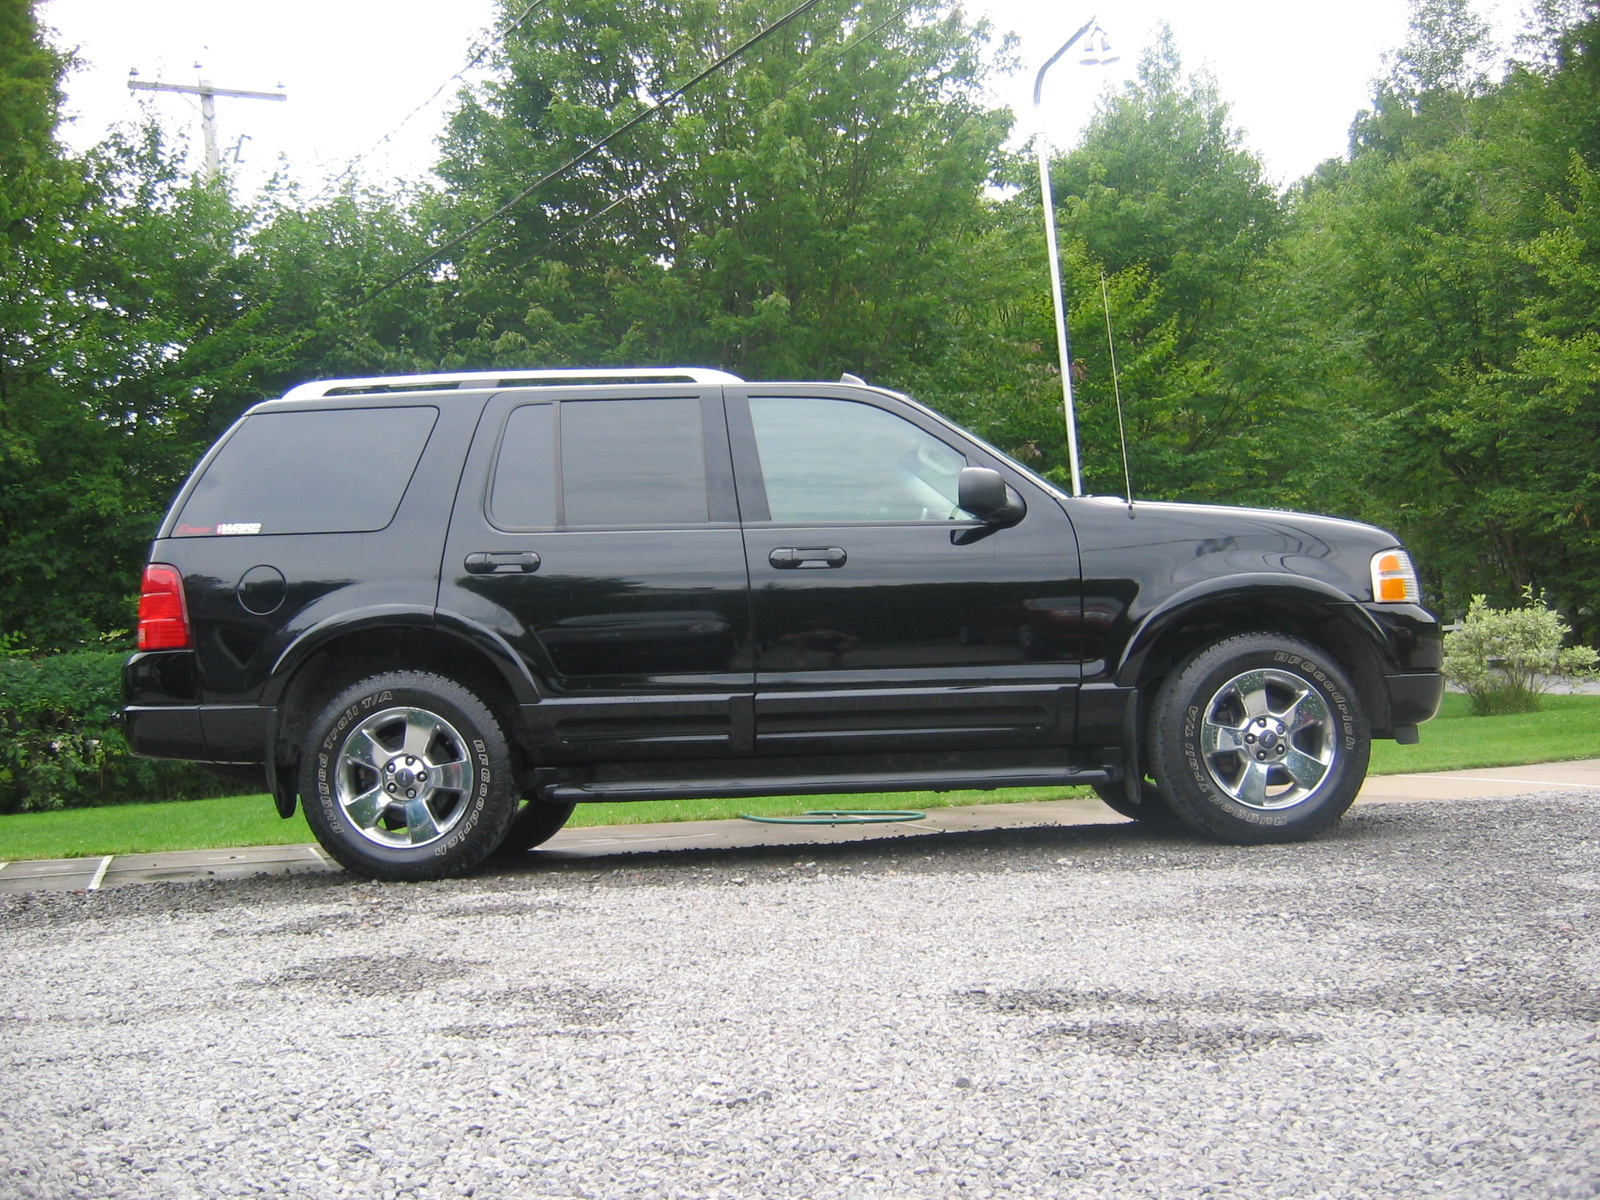 2003 Ford explorer limited wheels #9